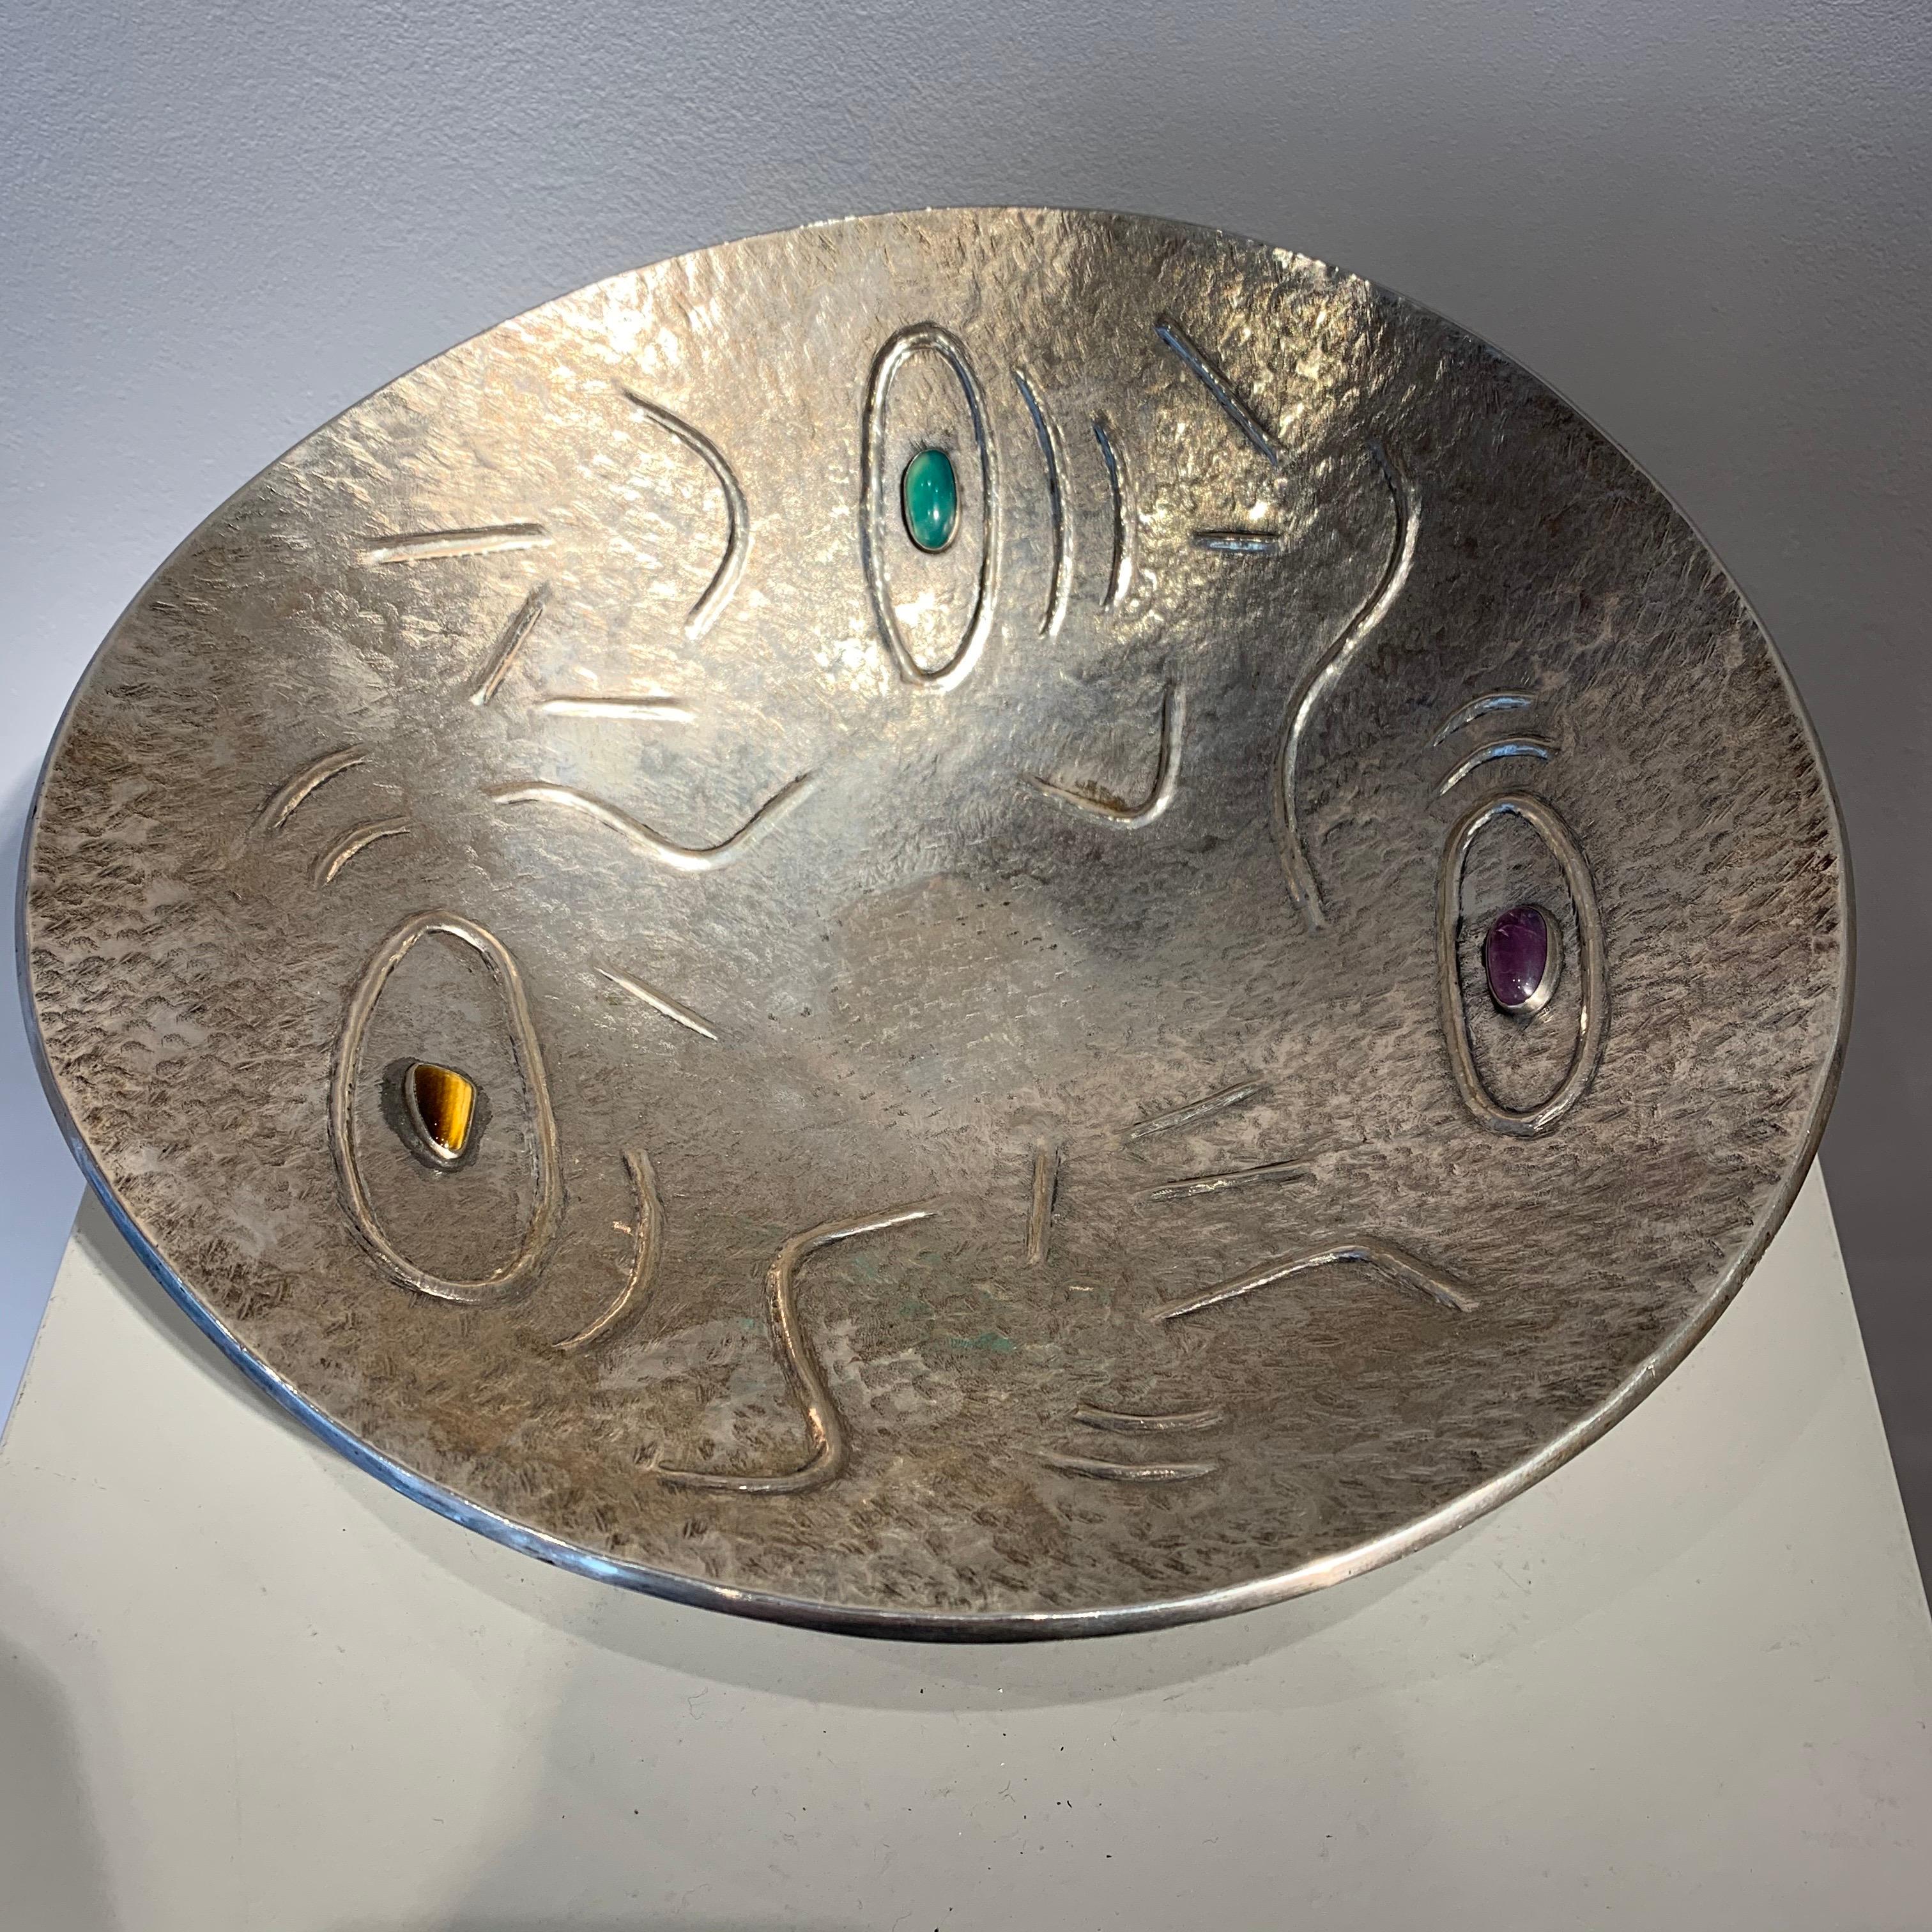 Finzi is a famous Italian Goldsmith. Typical of his work is silver objects with stones inserted. The design of this bowl shows an abstract decorative pattern.